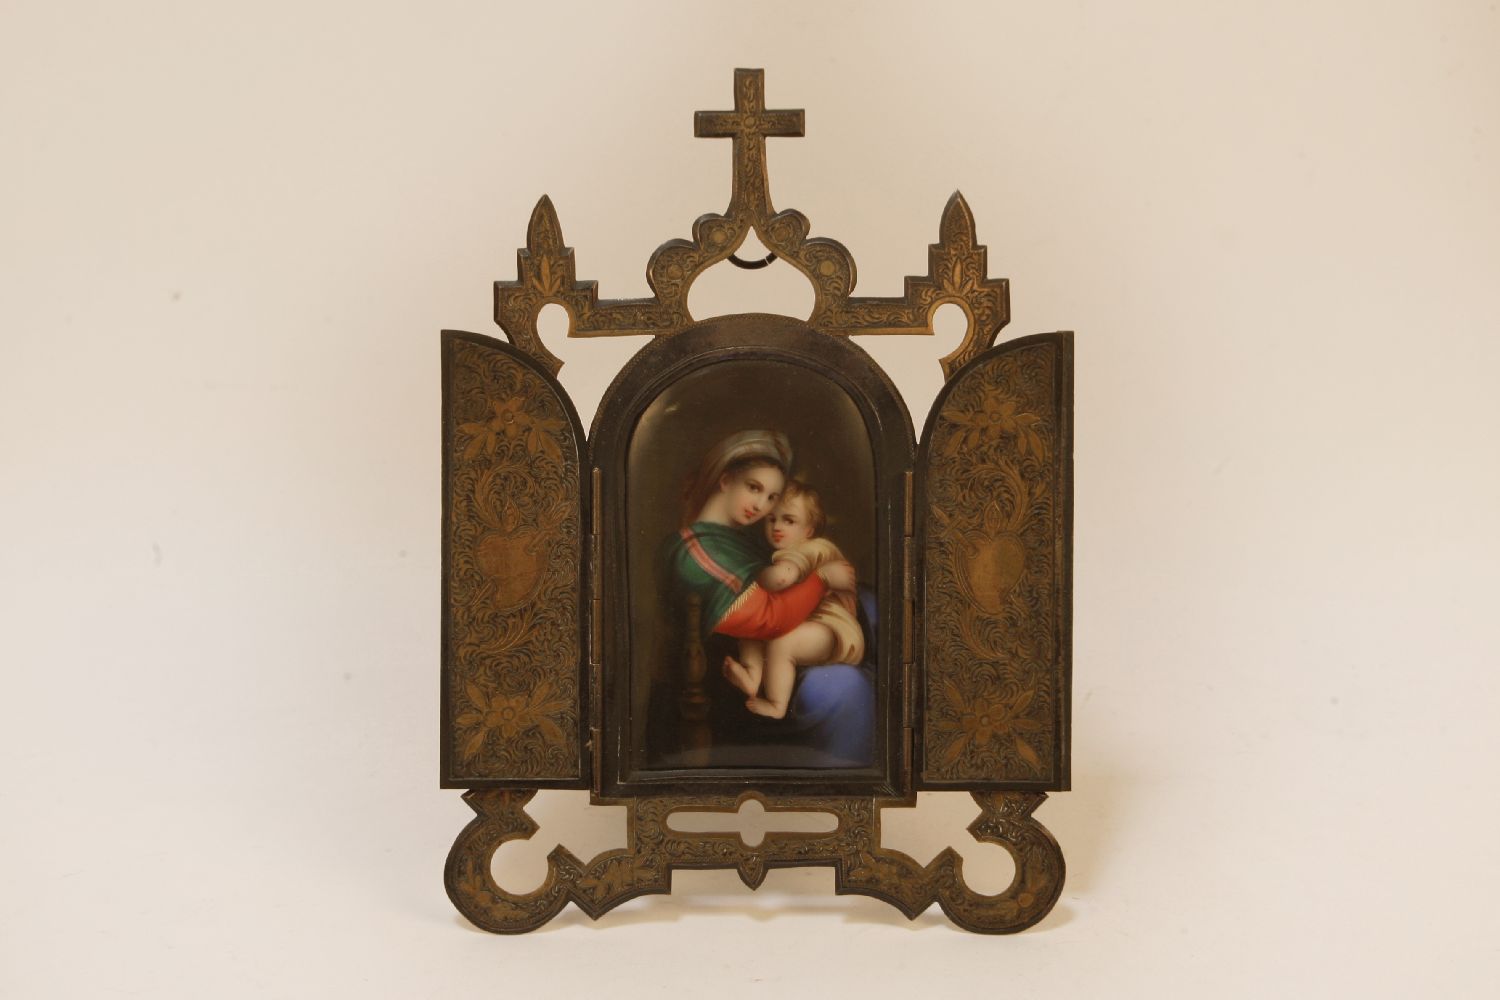 A porcelain icon possibly KPM depicting a panel of The Madonna and child in a gilt/plated stand,